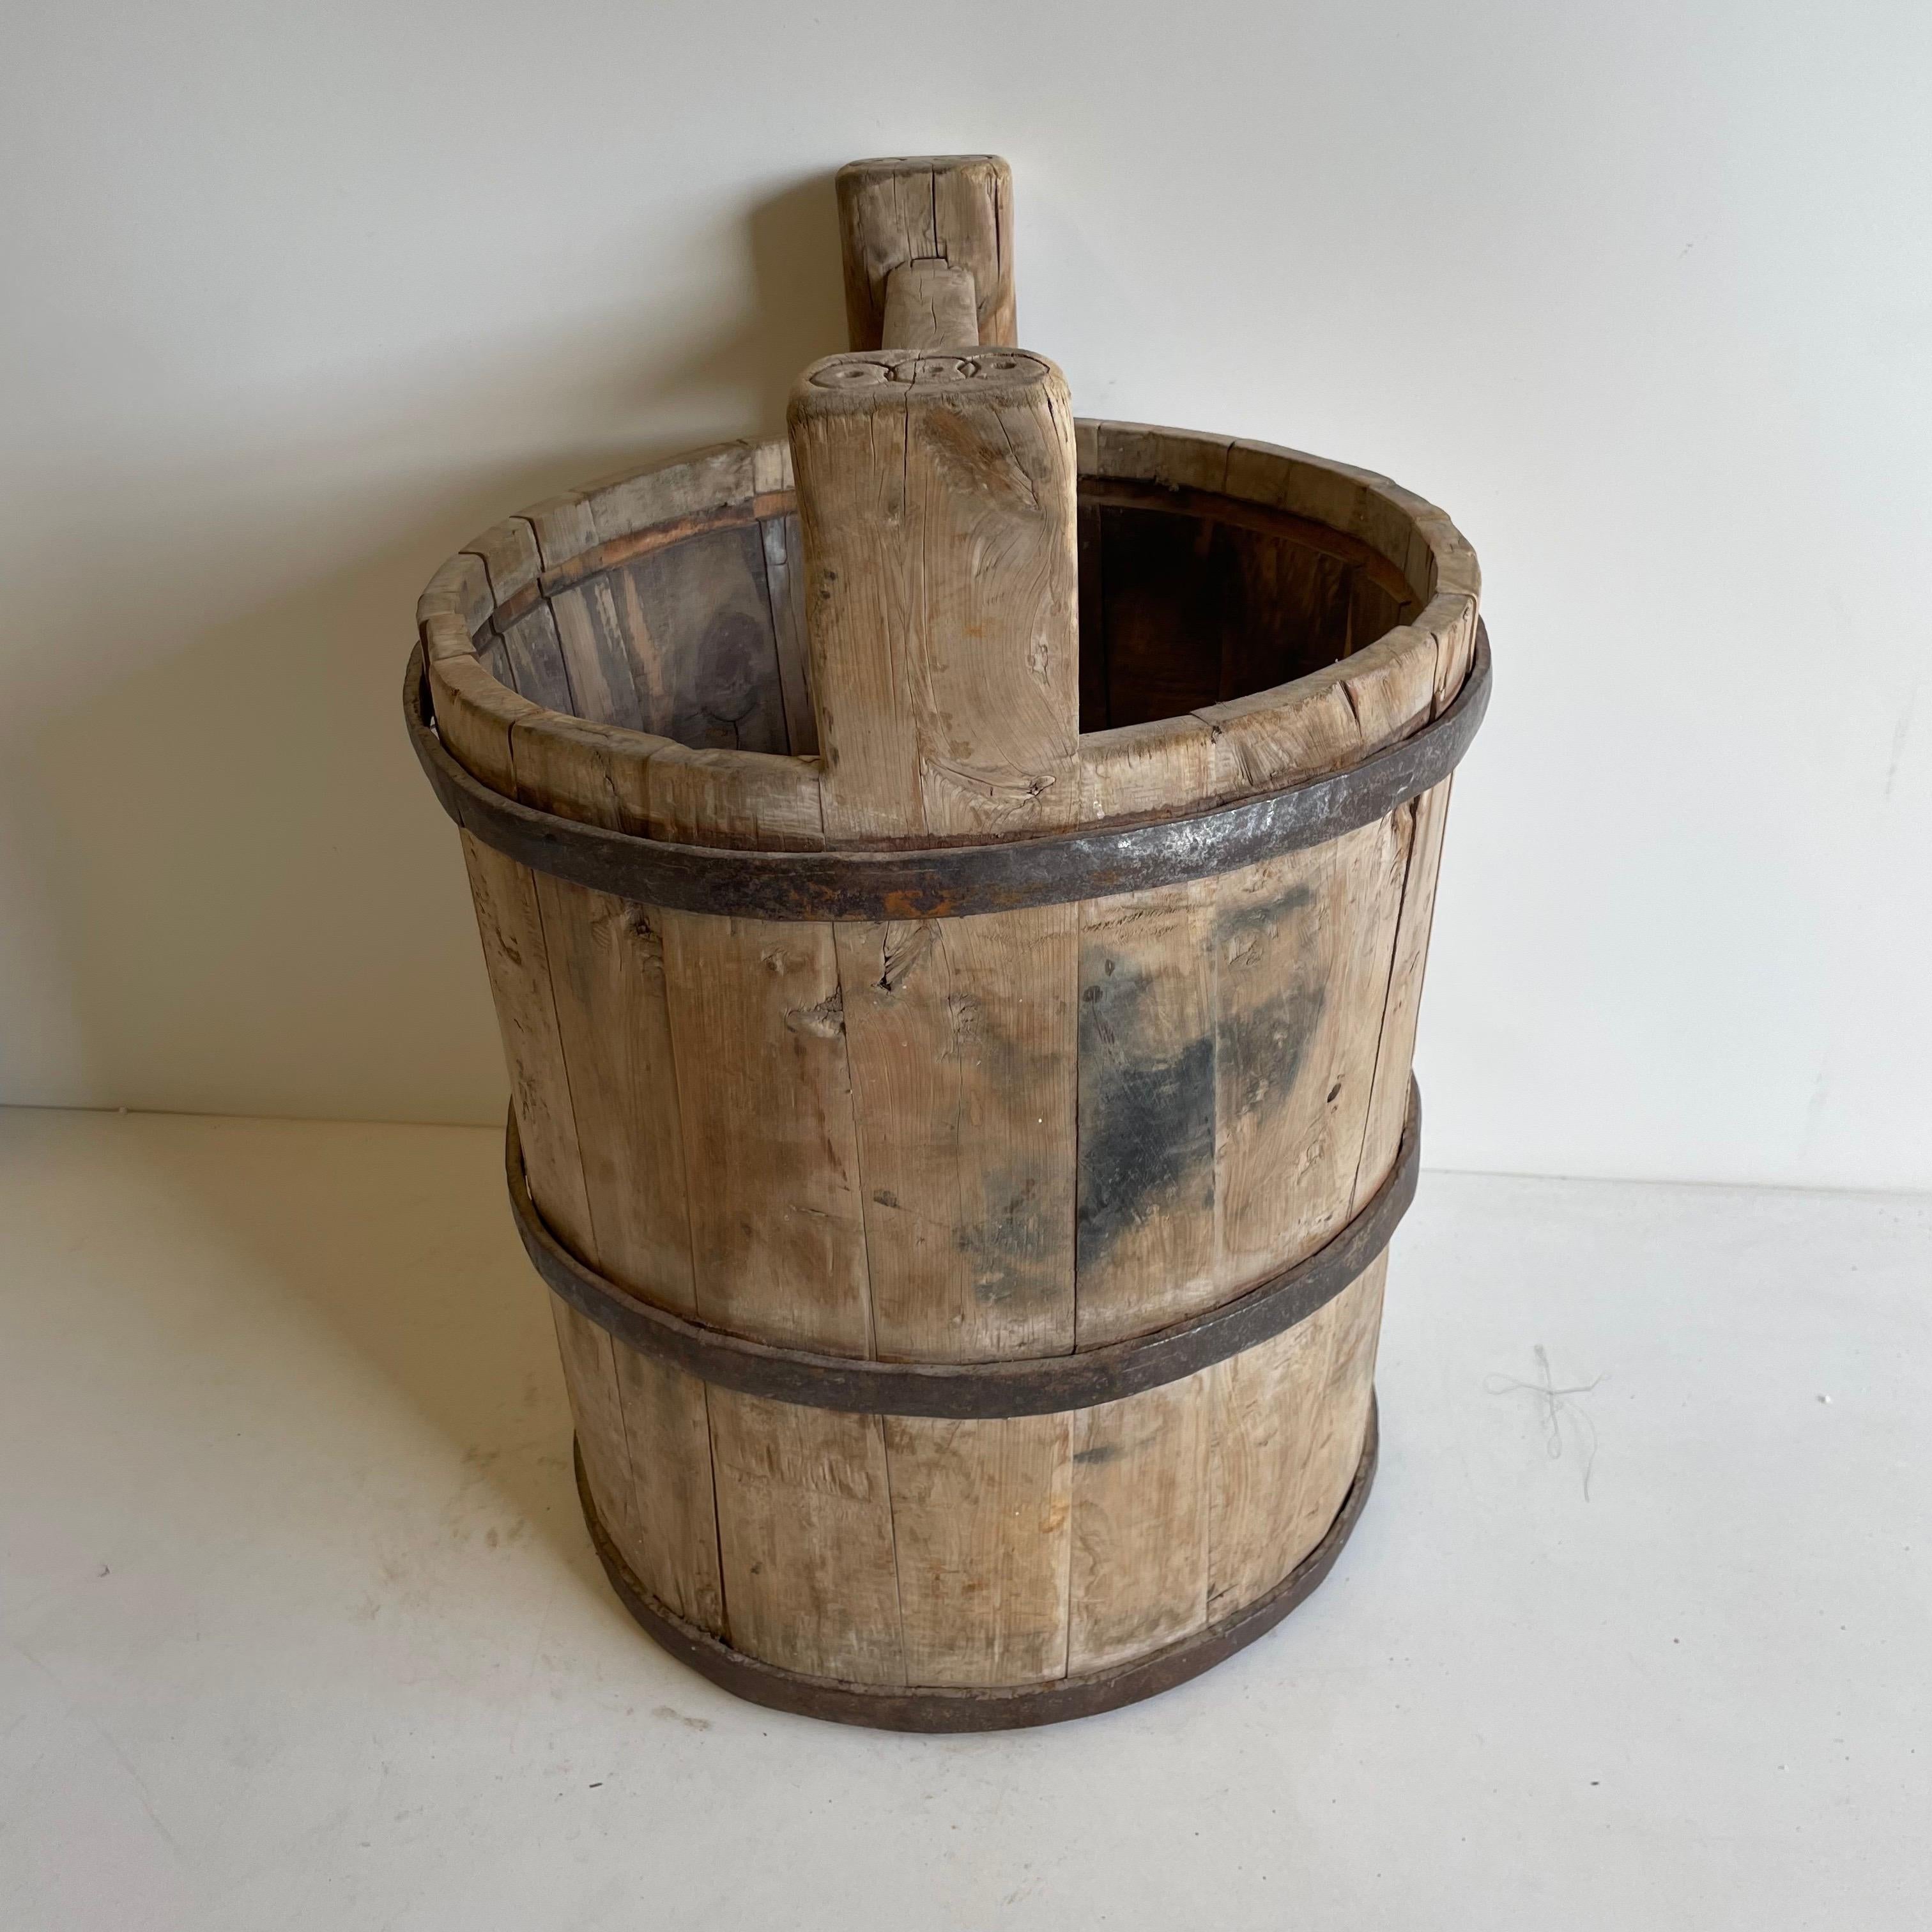 Antique Asian Cypress wood buckets used in the fields to collect vegetables, and food. Great now for in the home or garden. 
Measures: 14.5